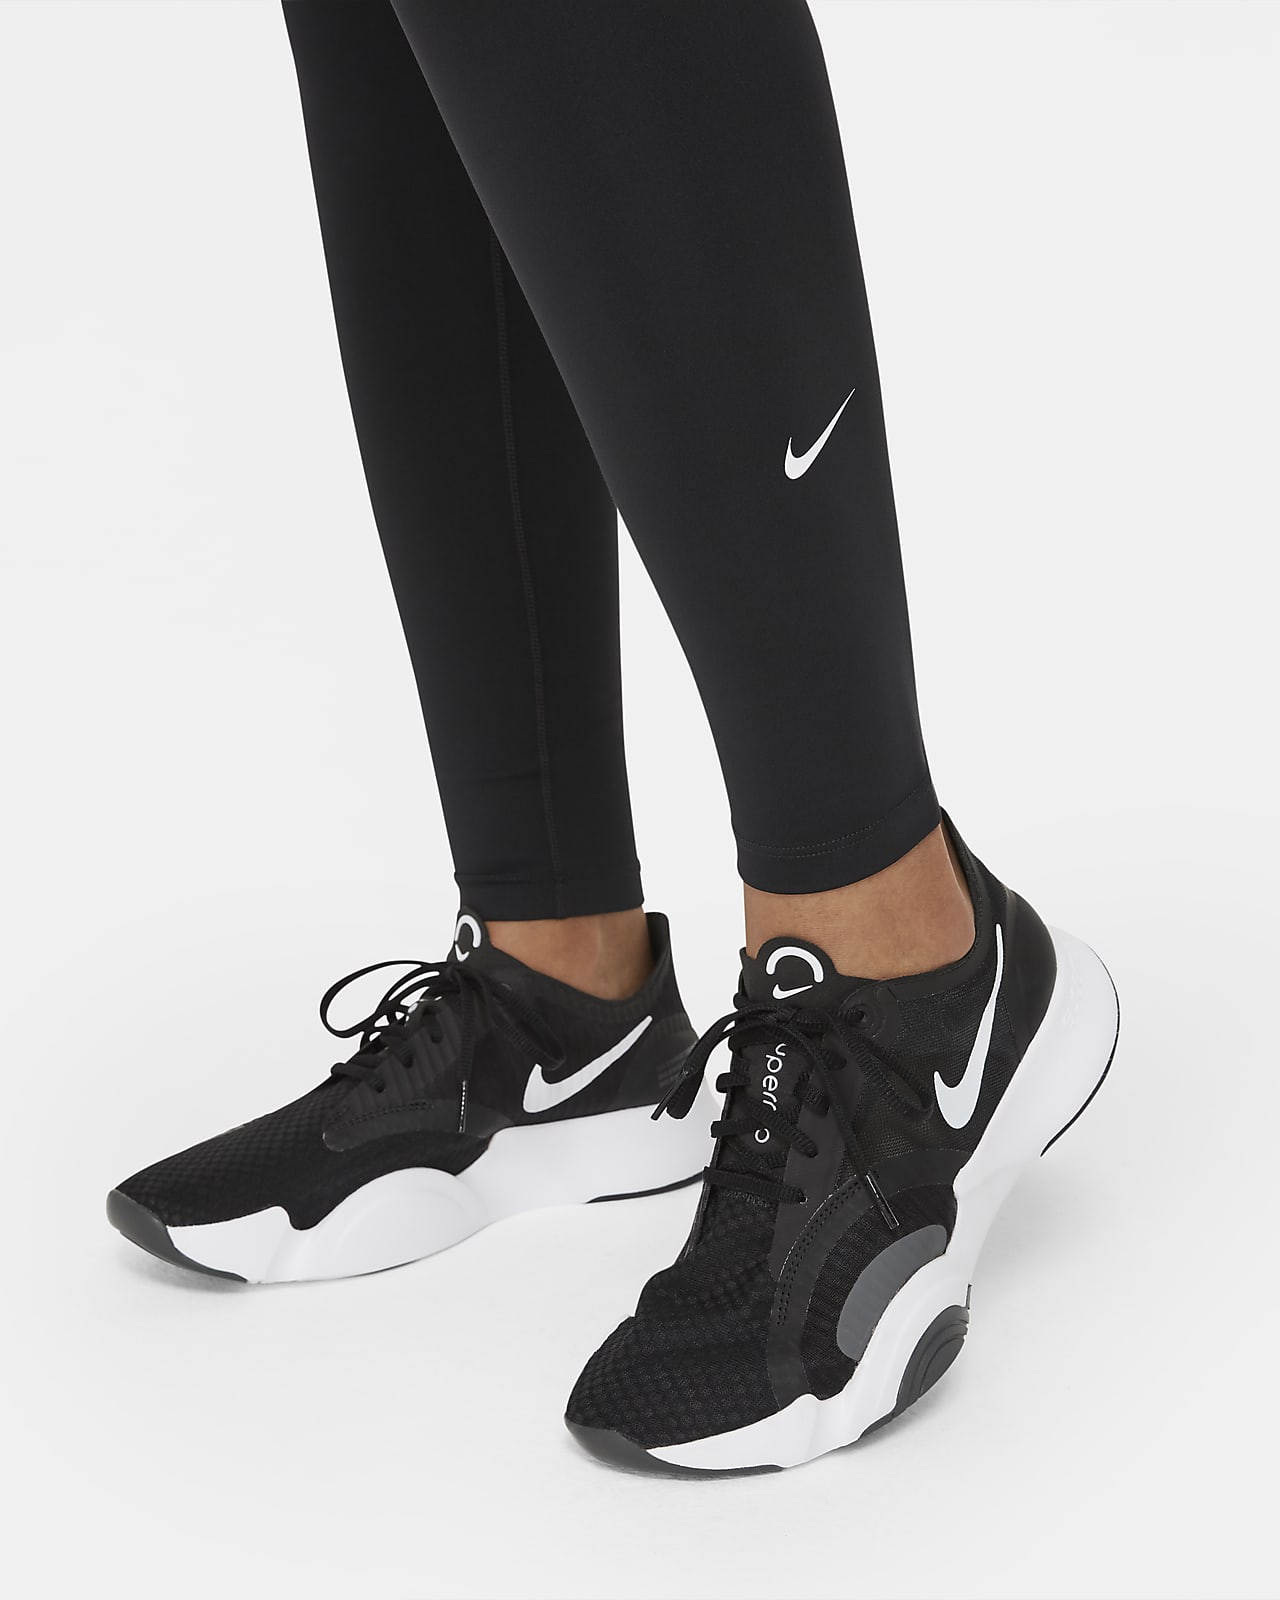 Buy Nike One Leggings from the Laura Ashley online shop